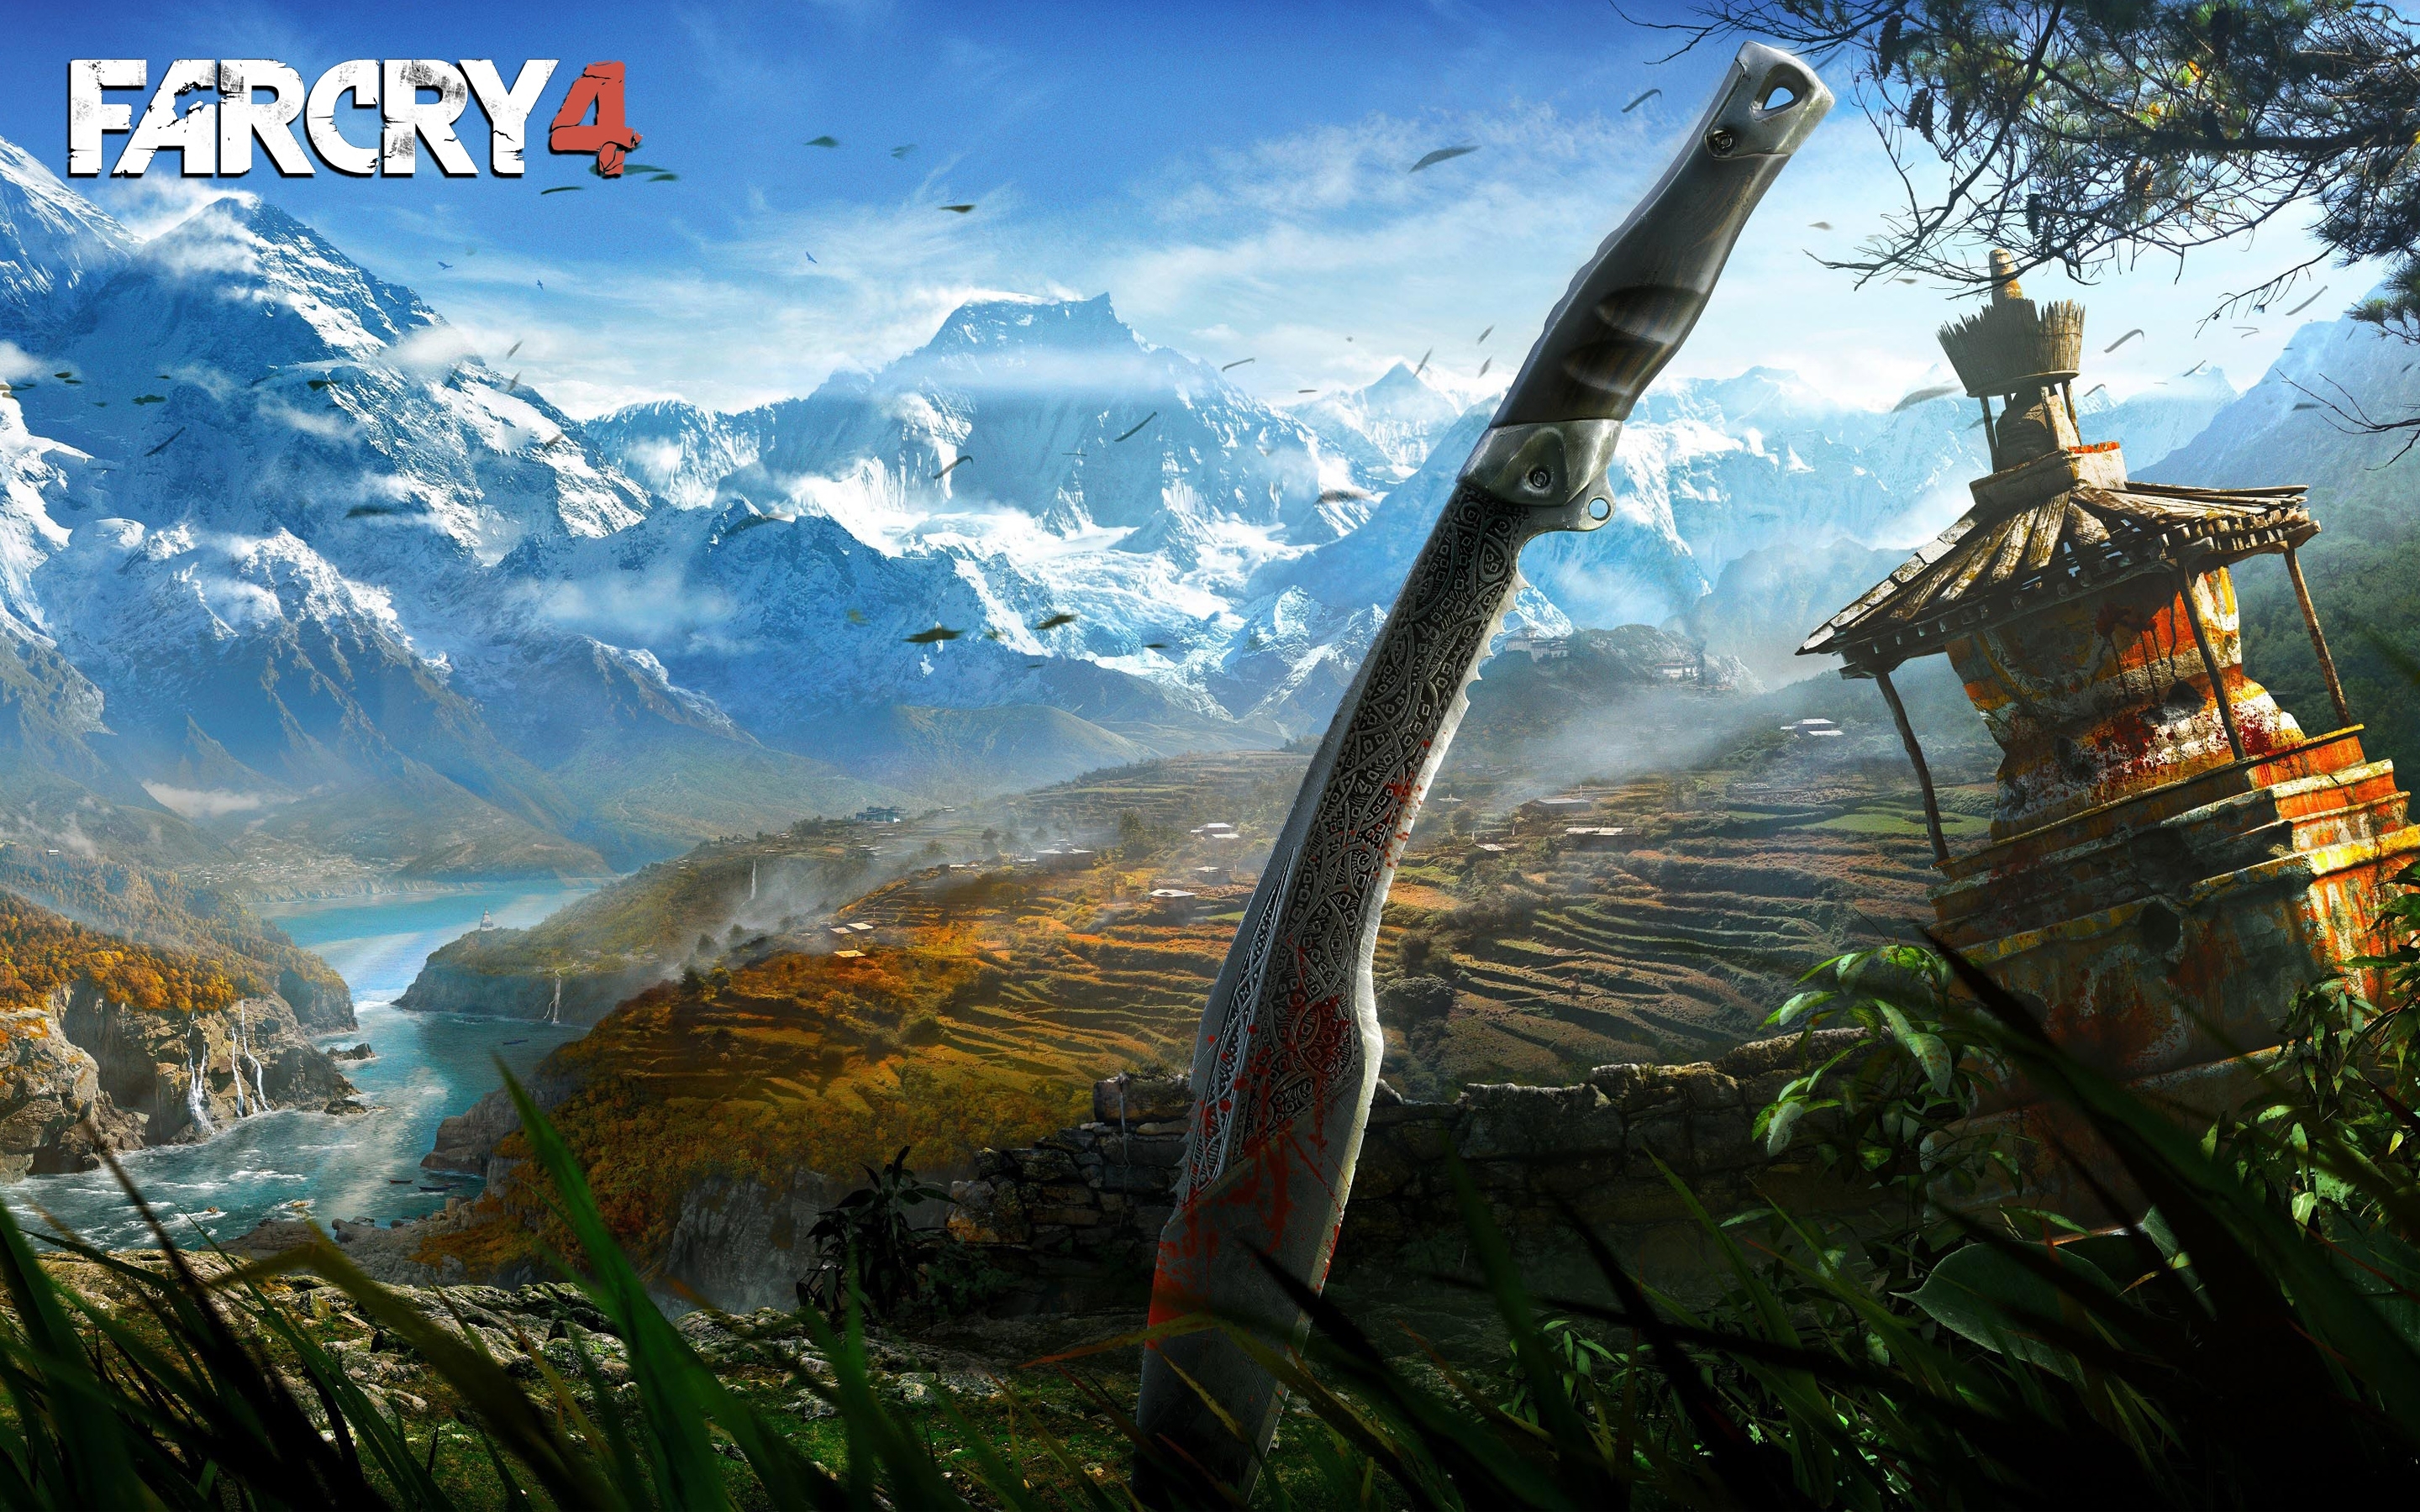 10 New Far Cry 4 Hd Wallpapers FULL HD 1080p For PC Background